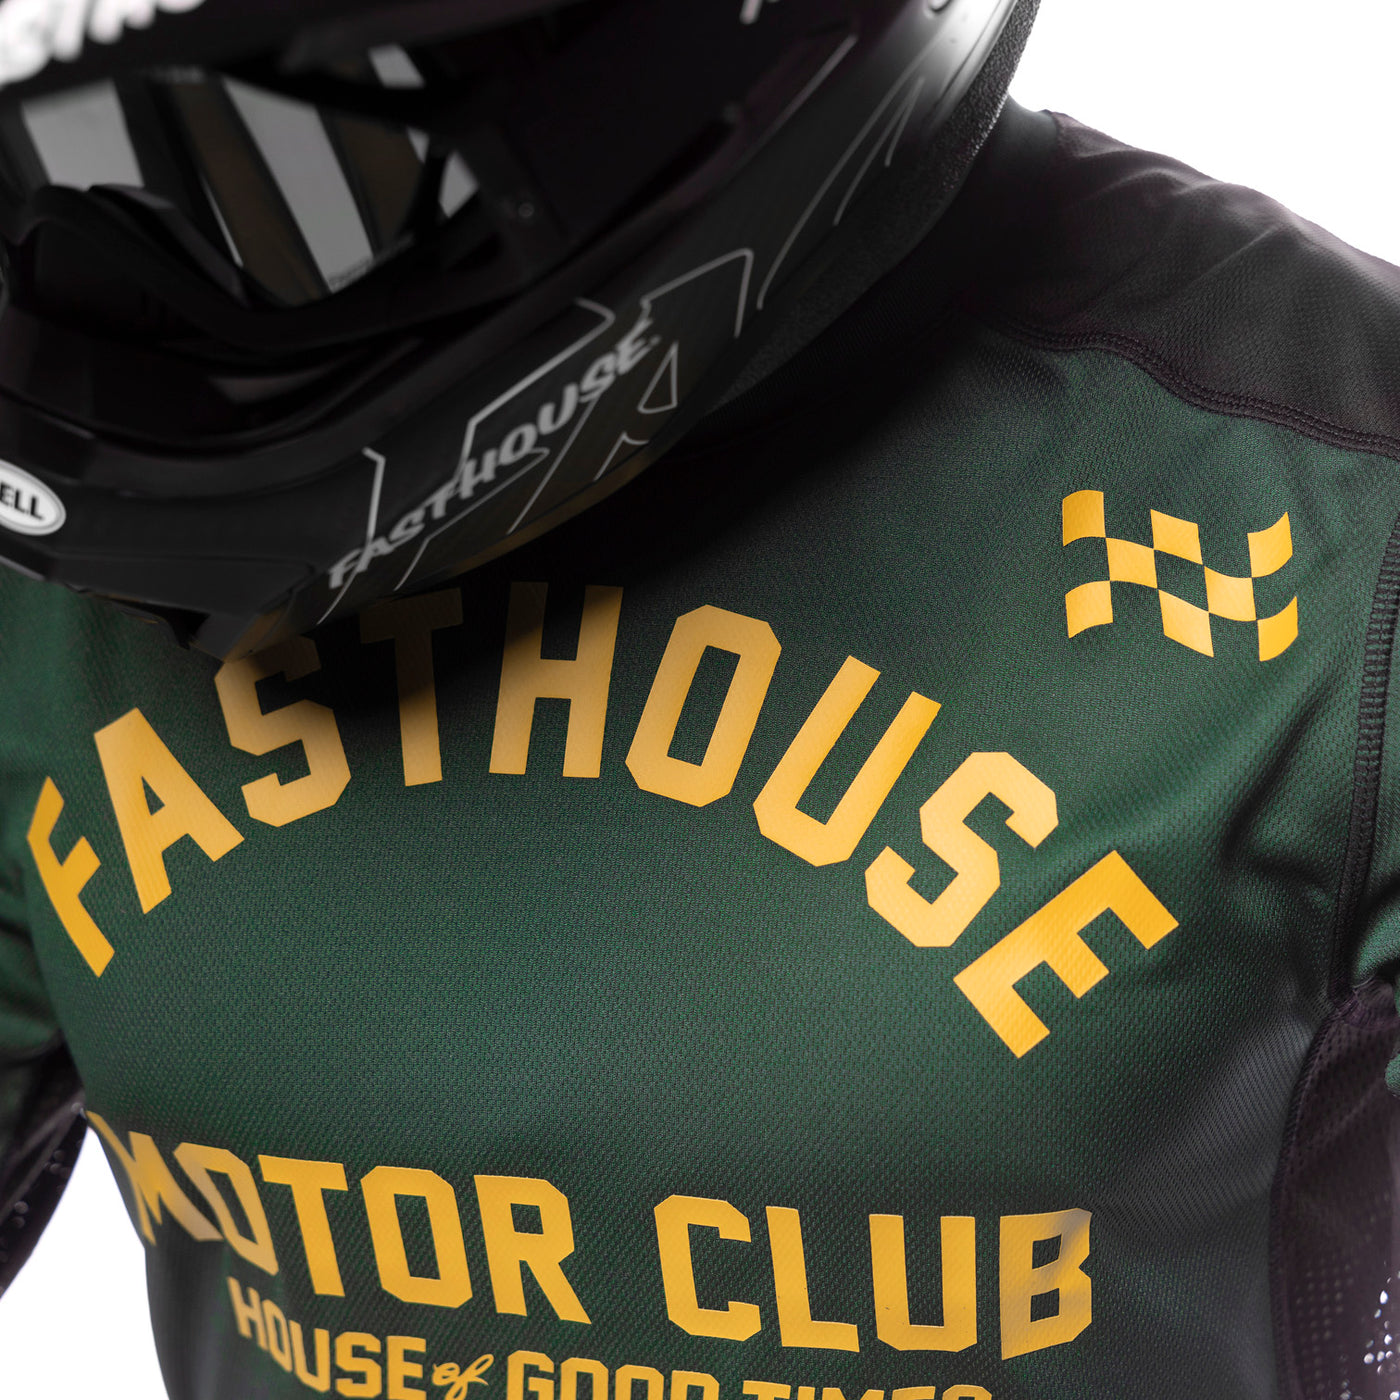 Fasthouse Grindhouse Sanguaro Jersey